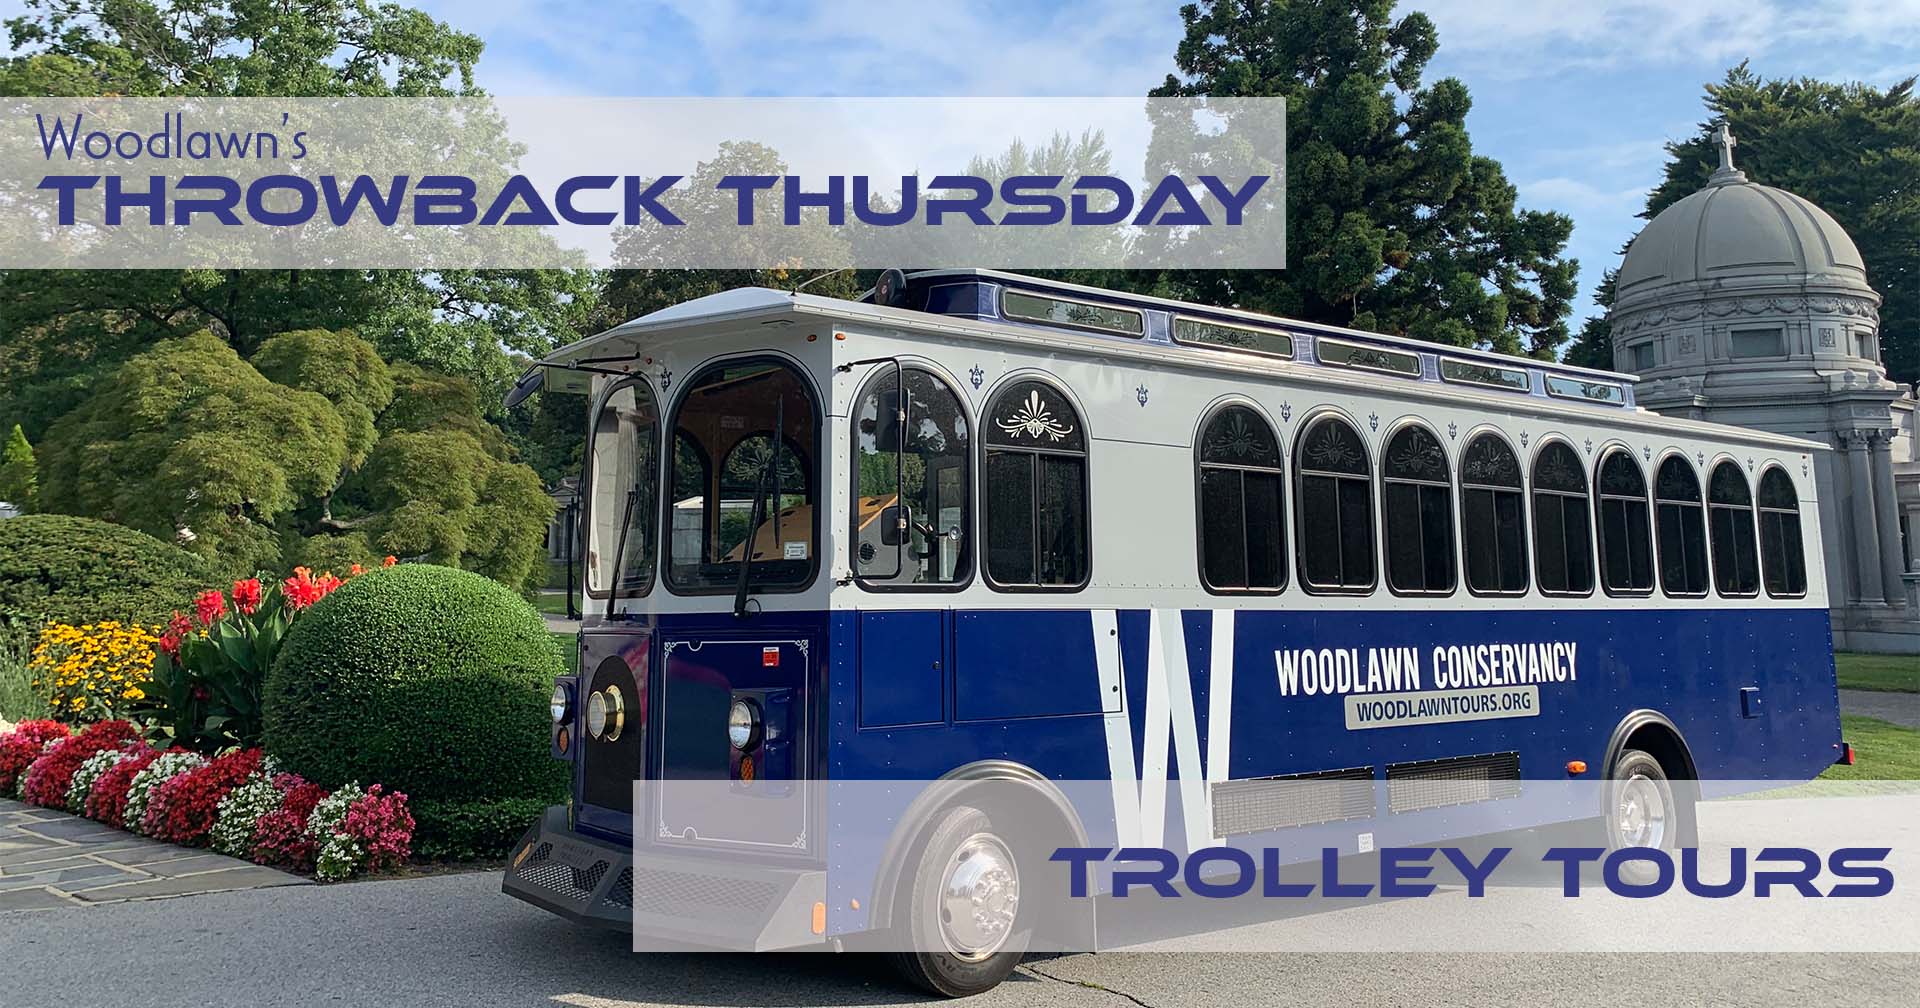 y13April 21, 2022 Woodlawn's Throwback Thursday Tour — Woodlawn Conservancy